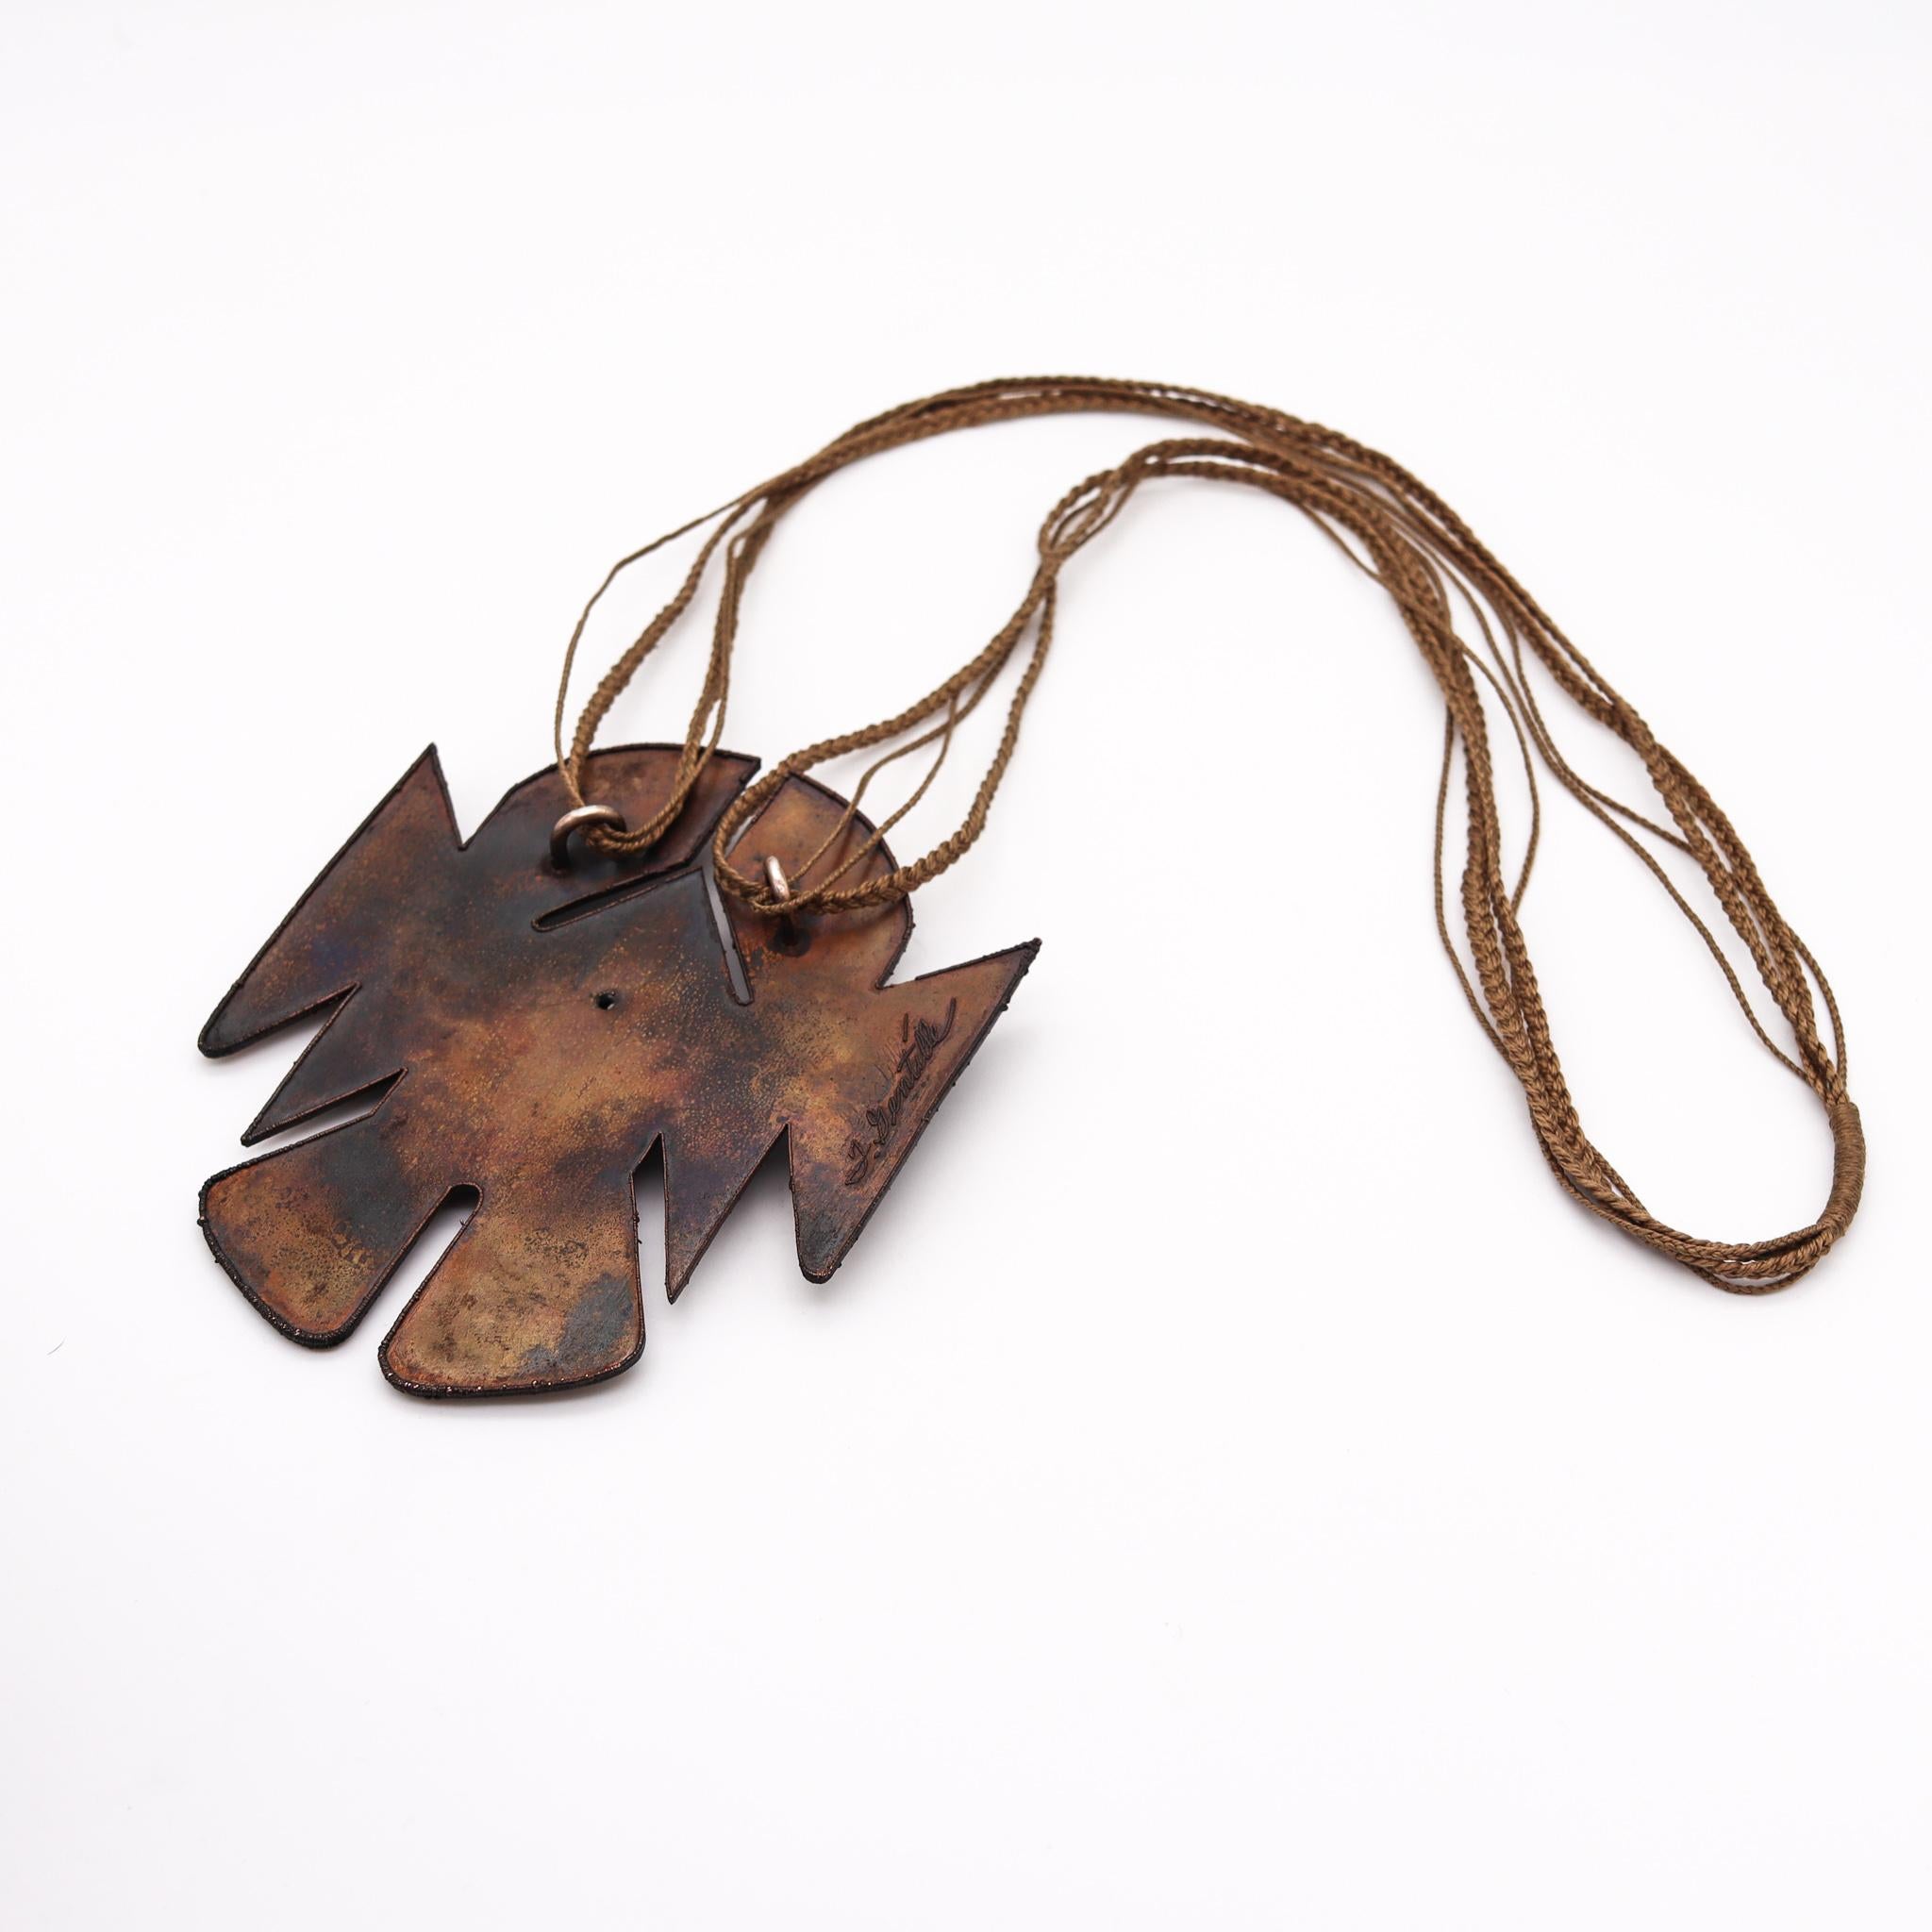 Modernist Thomas Gentille 1970 Rare Sculptural Ethnics Necklace In Copper And Cotton For Sale